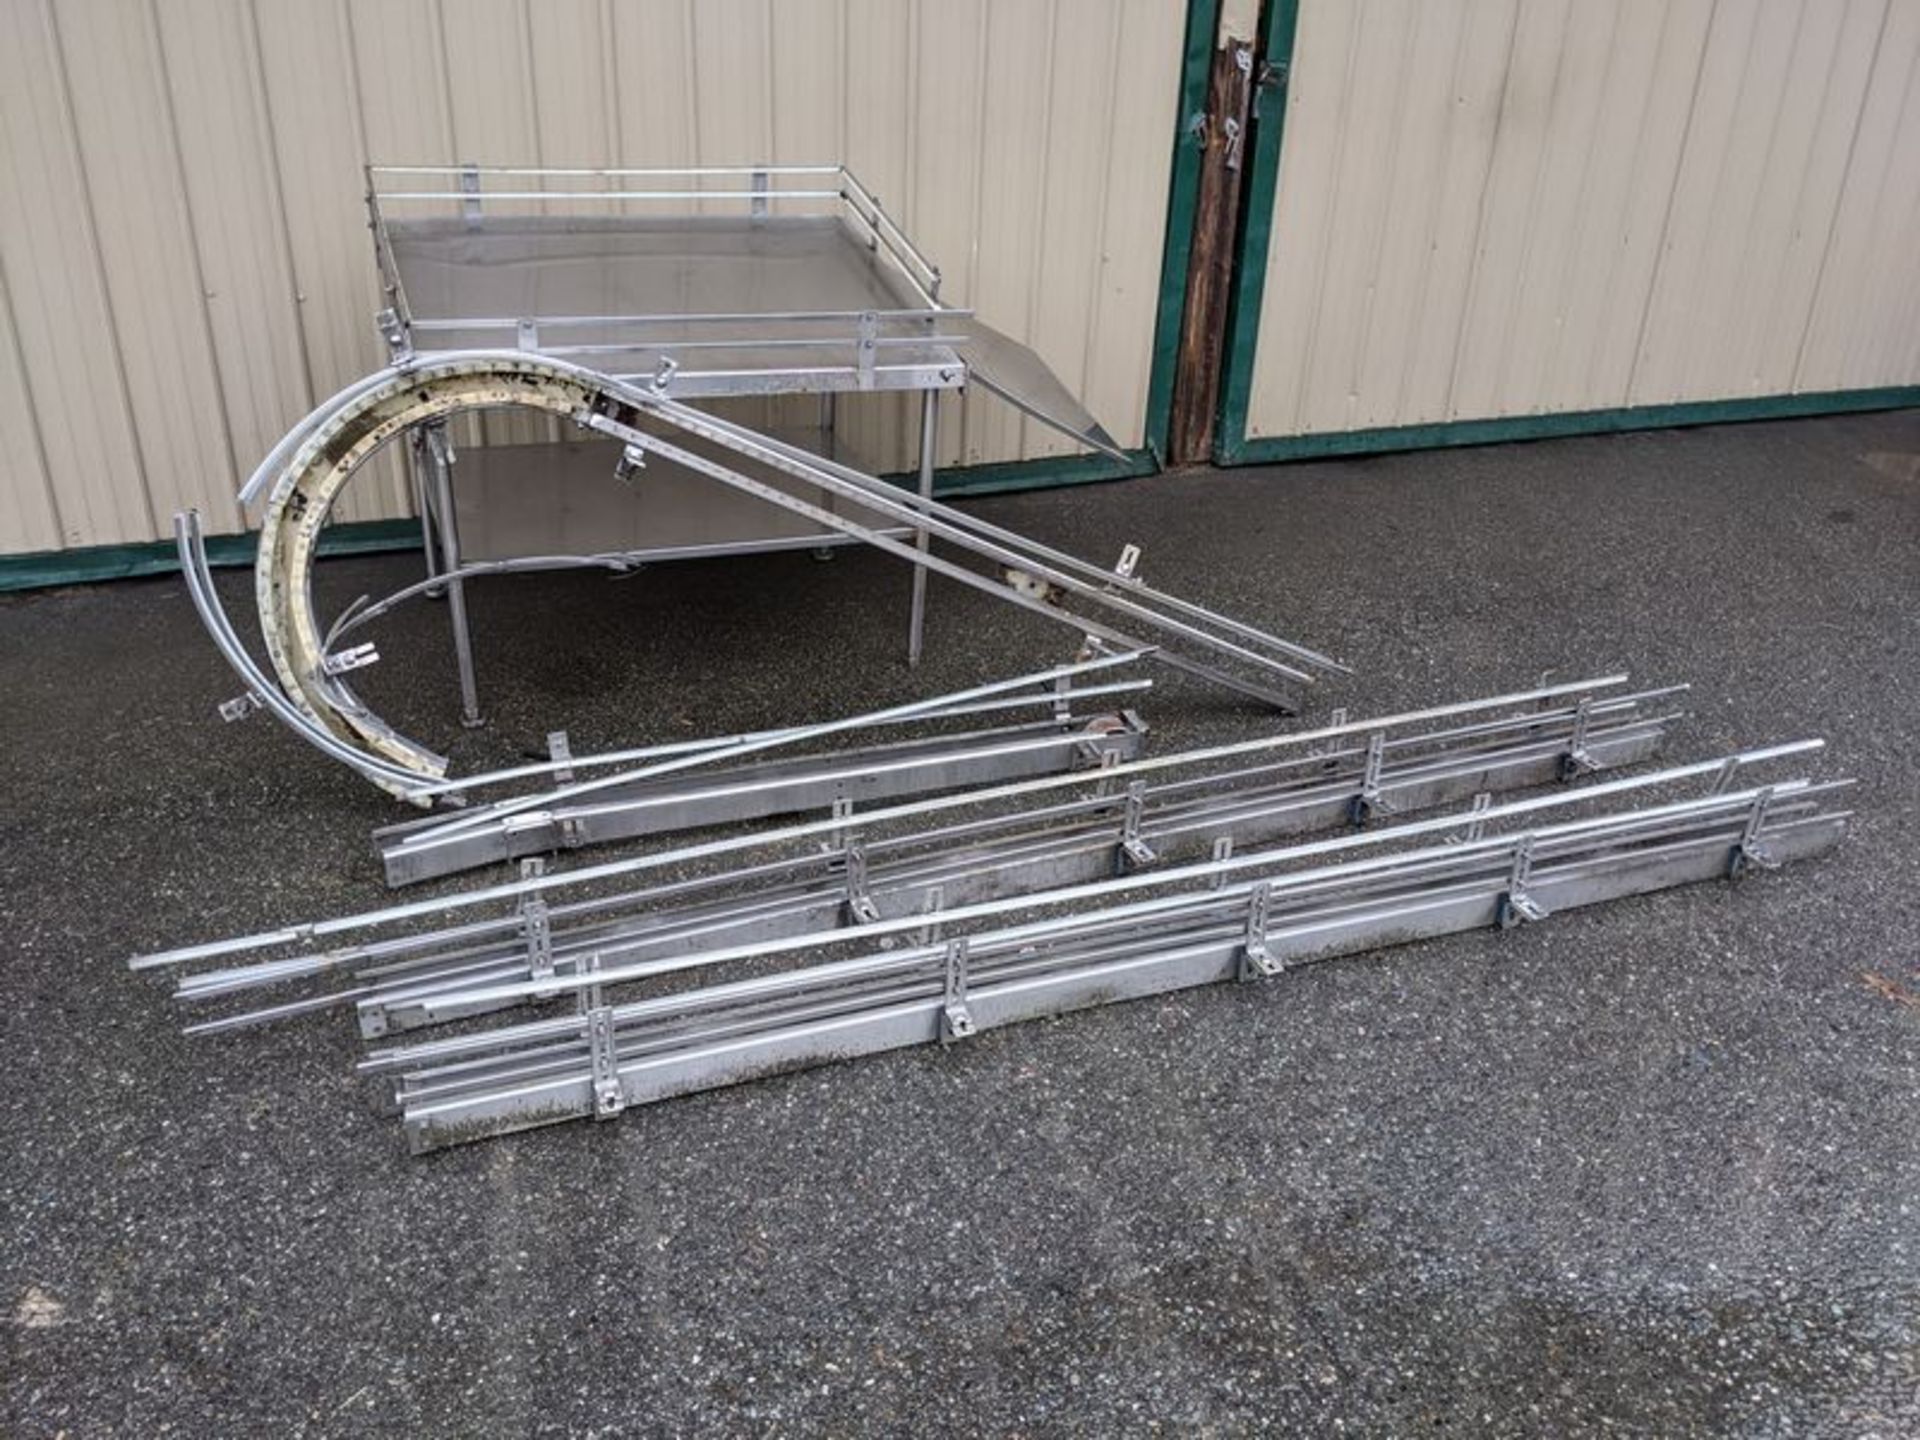 Bottle Sorting Table with Bottle Conveyors comes with 2 boxes of Tracking